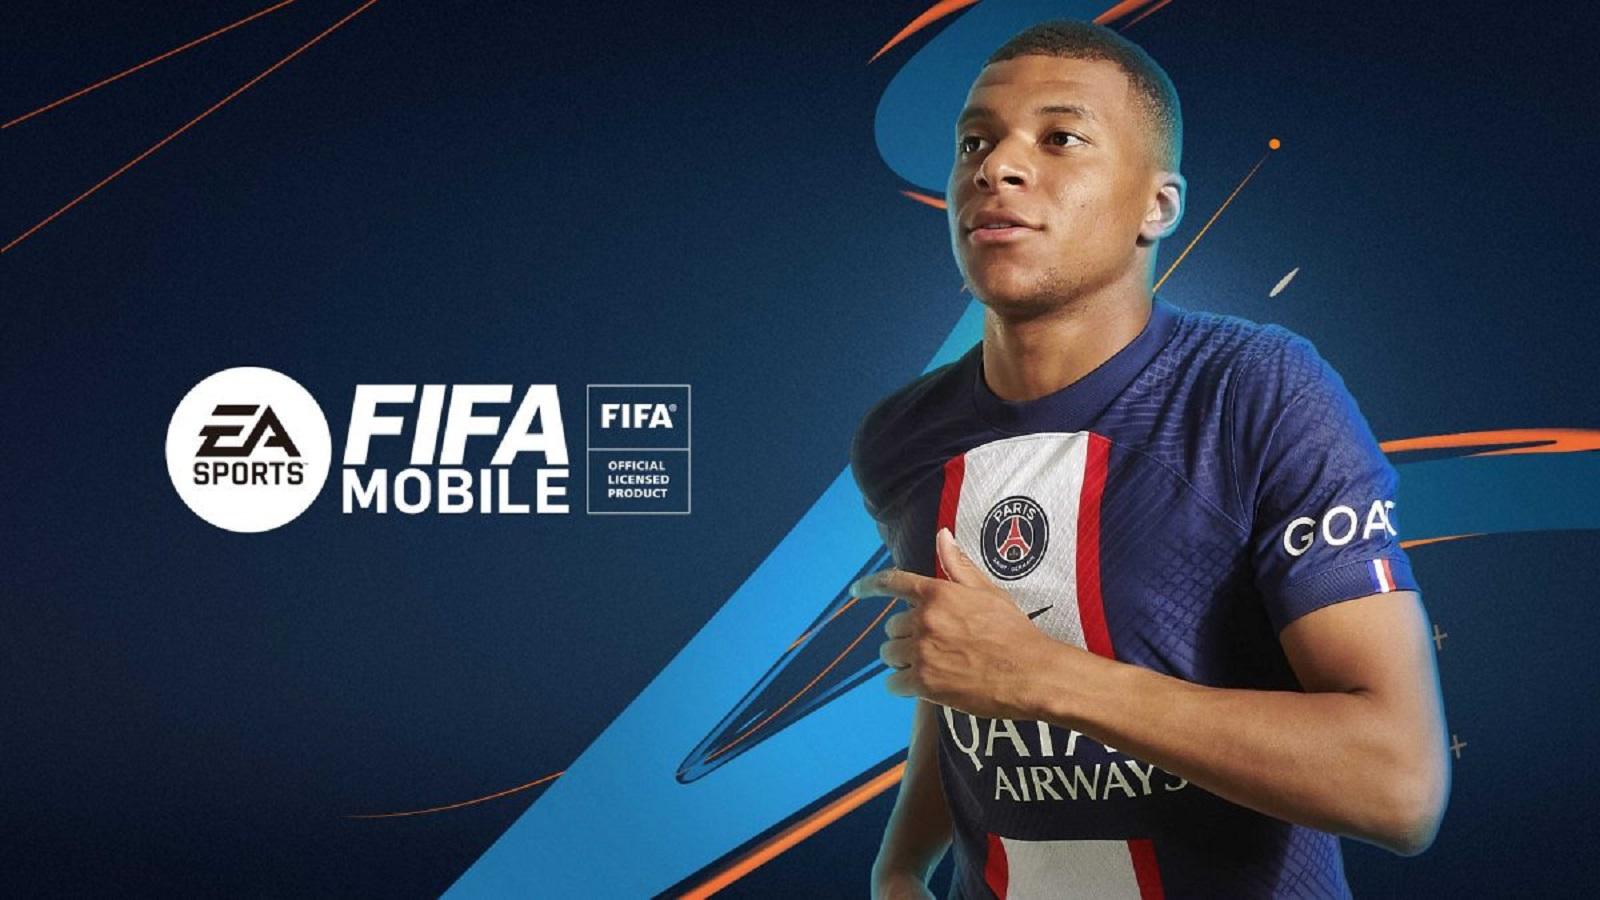 cover art for FIFA Mobile featuring Kylian Mbappe